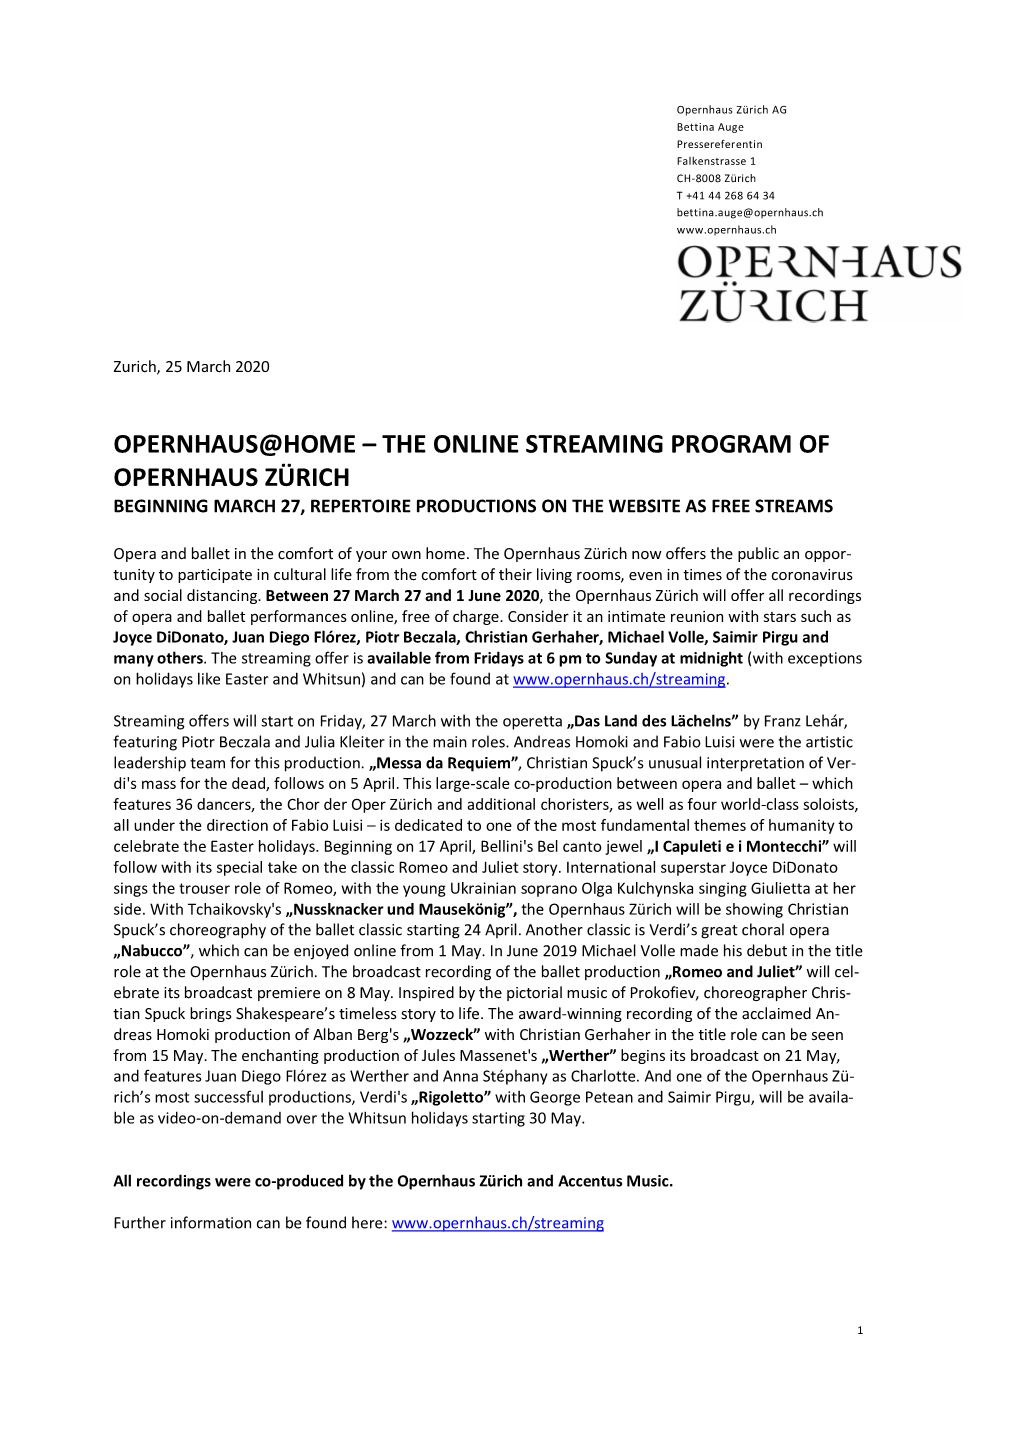 The Online Streaming Program of Opernhaus Zürich Beginning March 27, Repertoire Productions on the Website As Free Streams